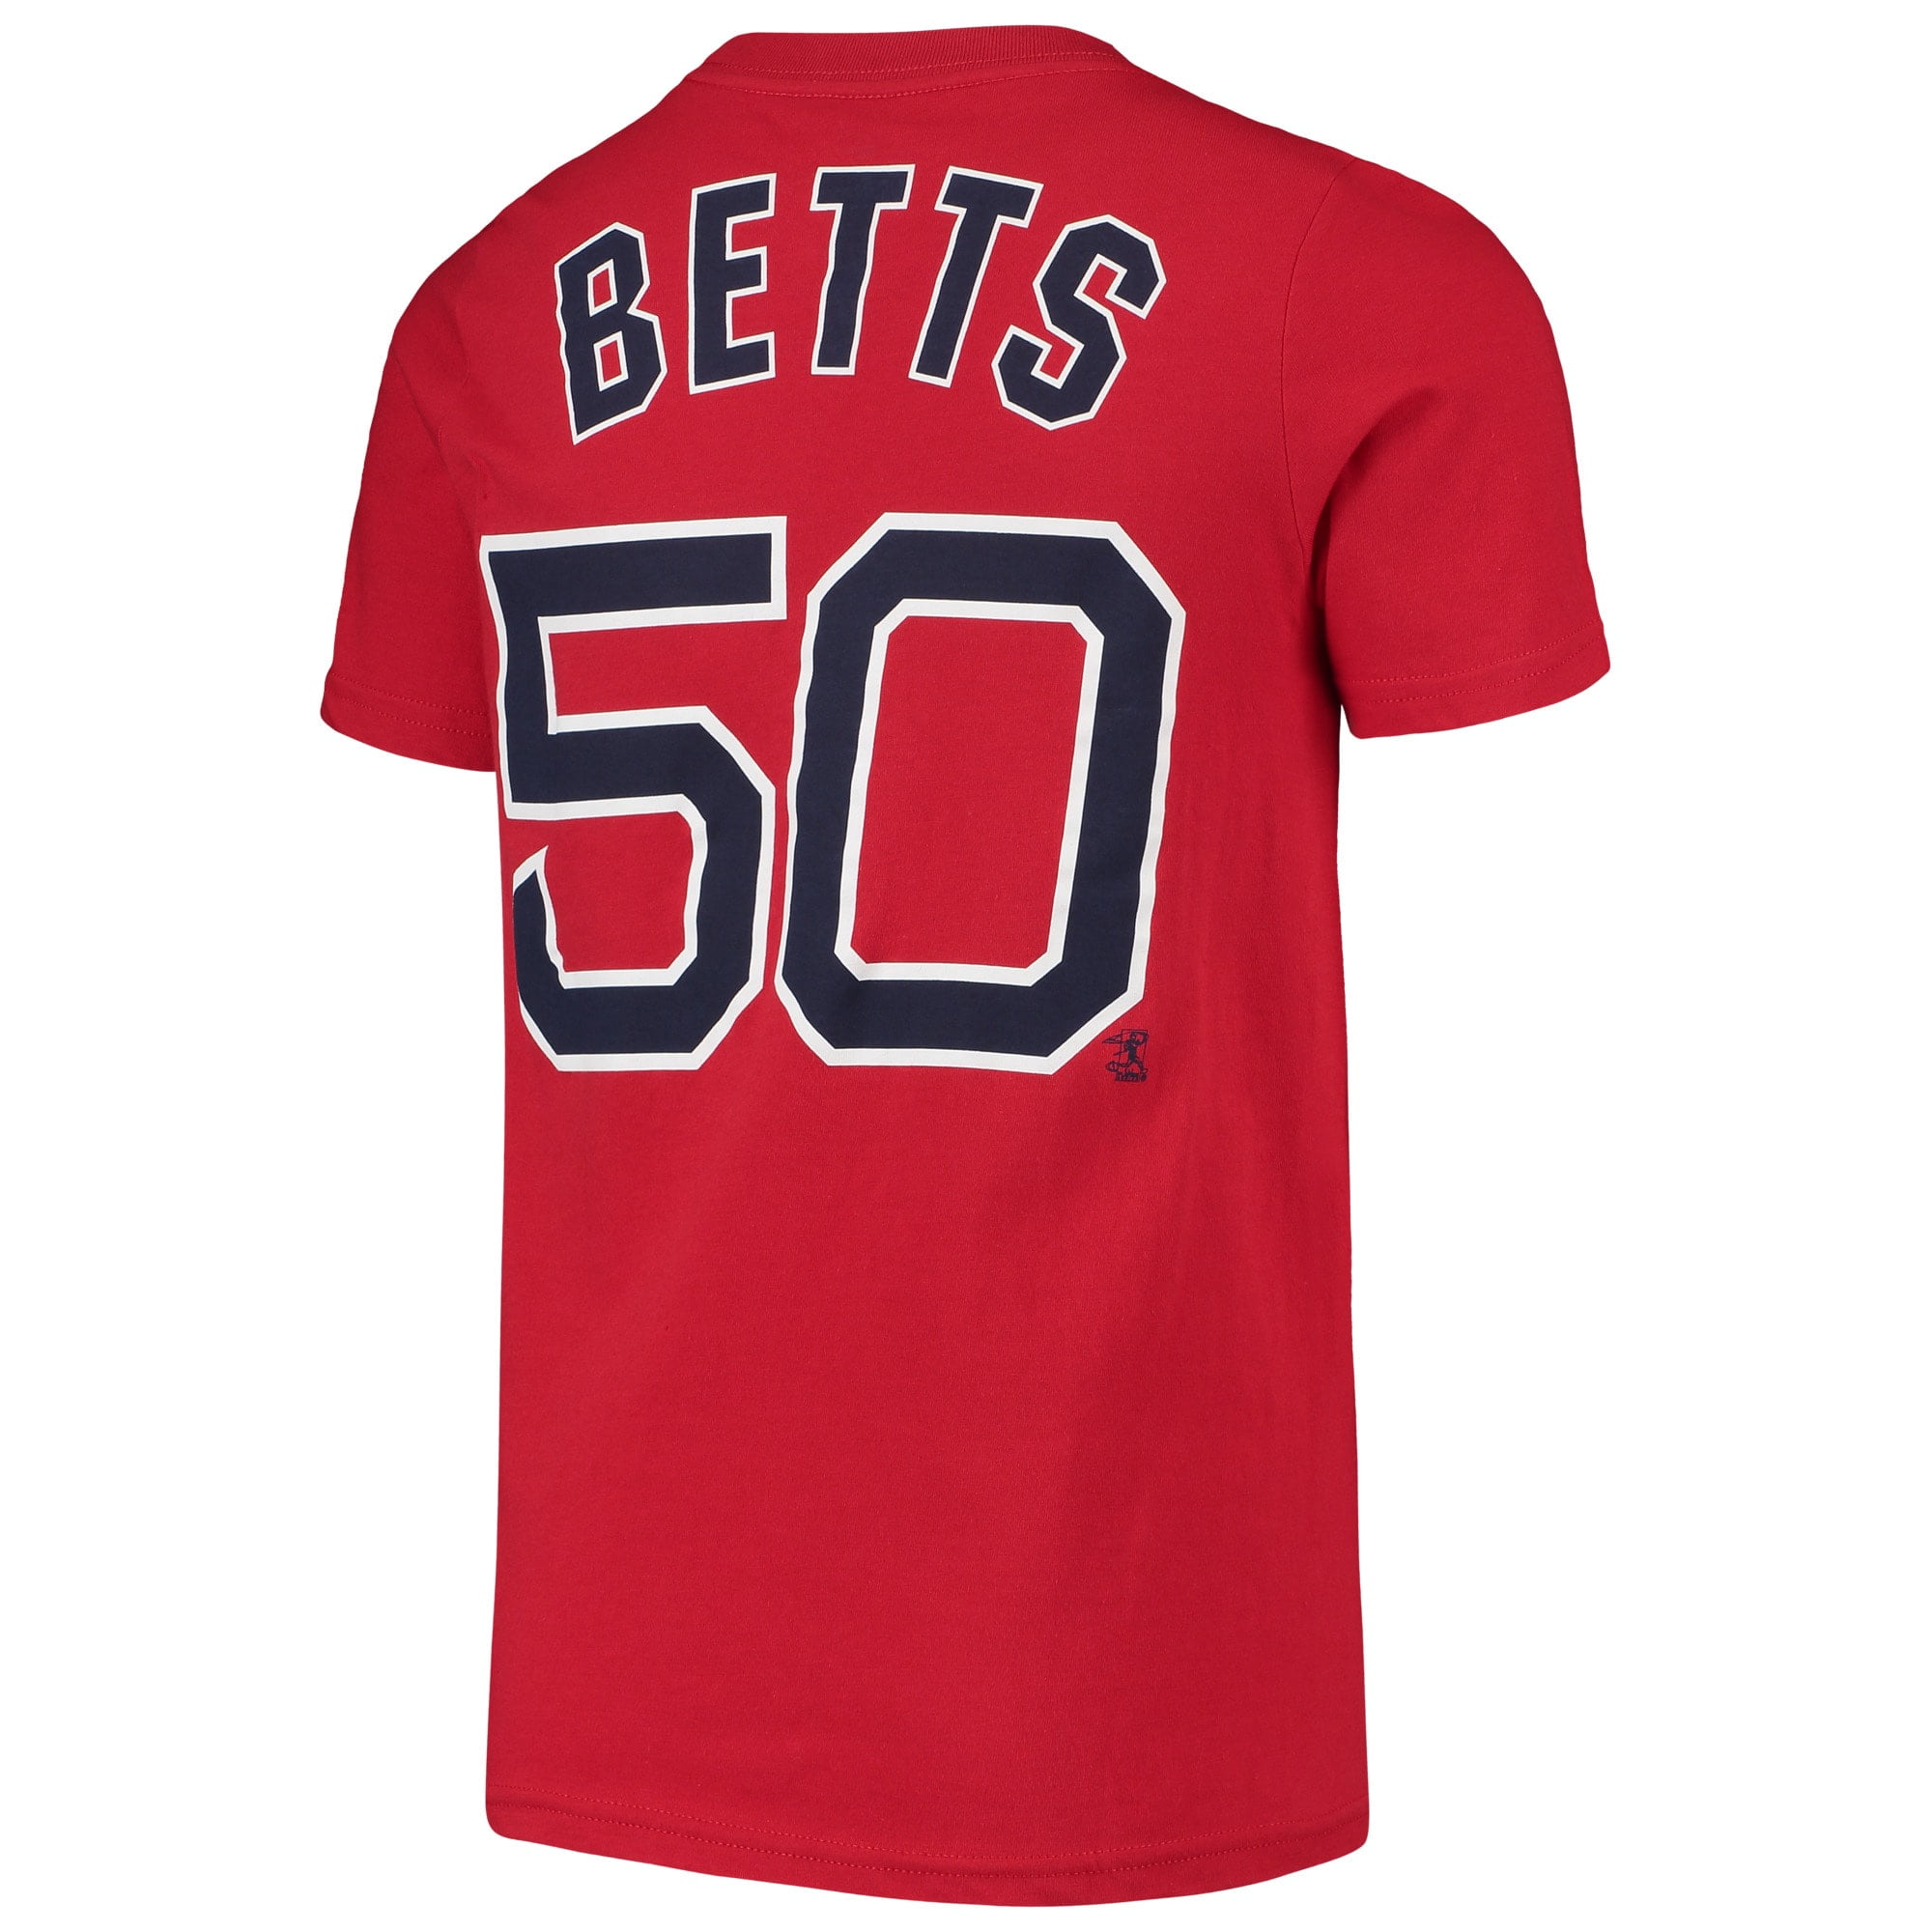 mookie betts jersey number